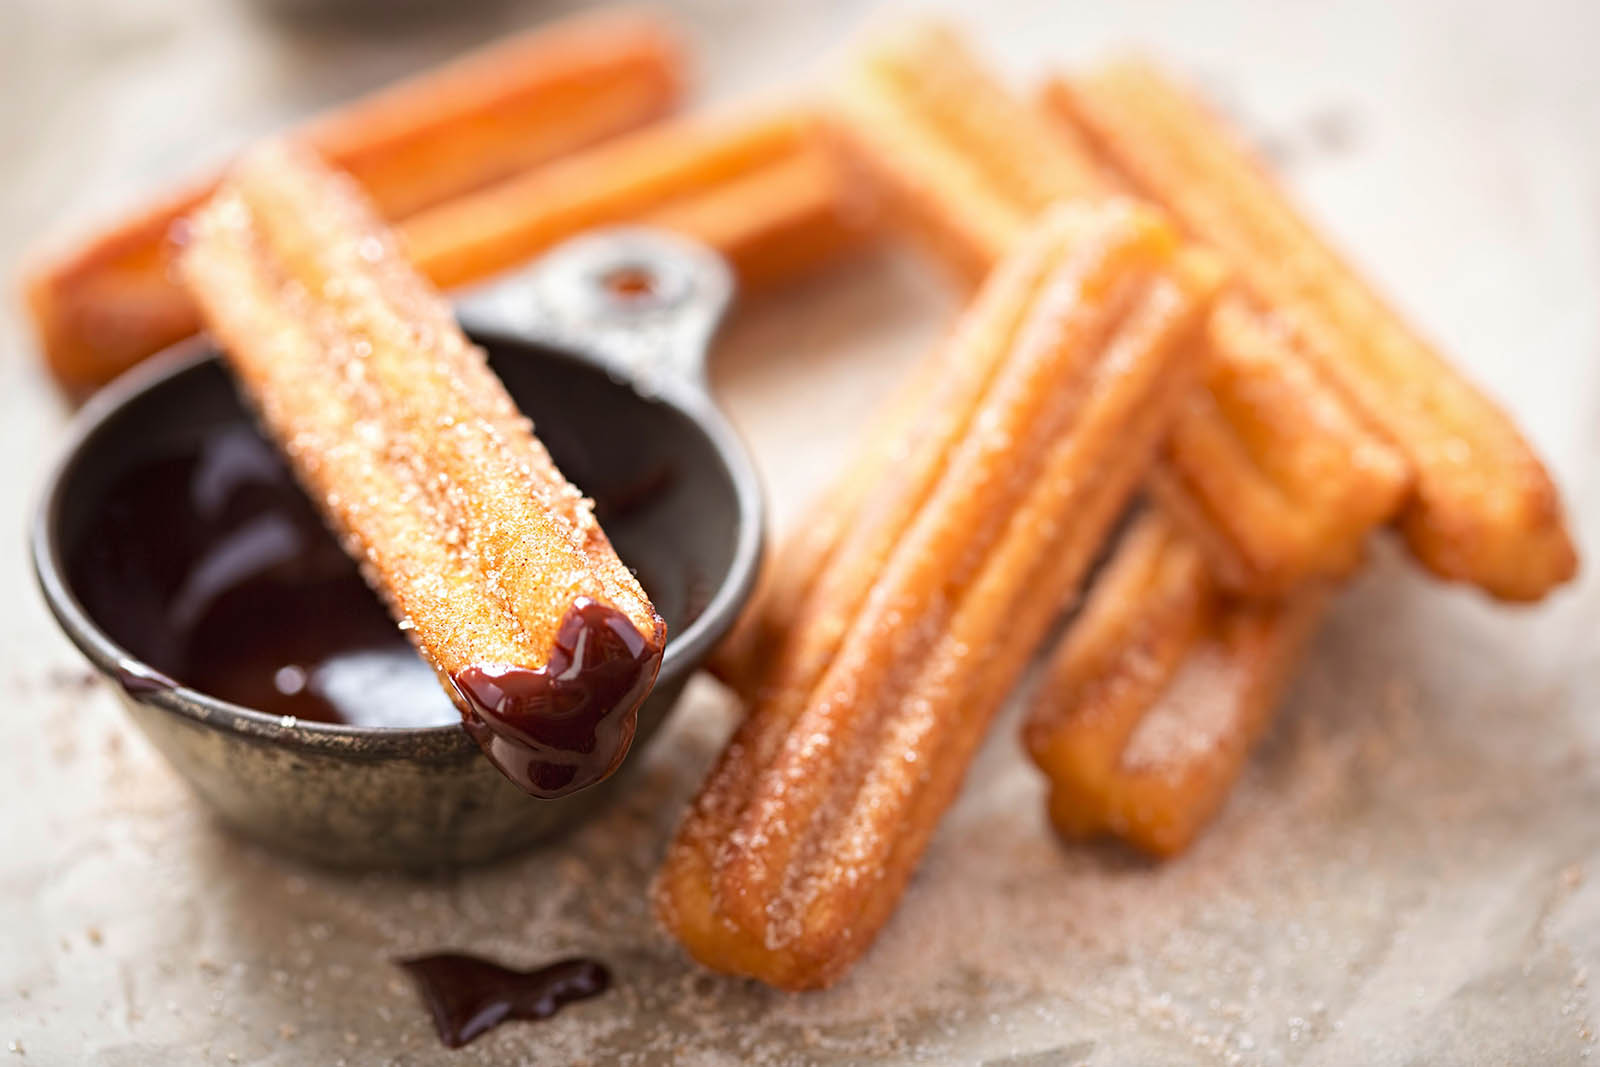 The Snacks You Love and the Veggies You Hate Will Determine Your Age With Alarming Accuracy Churros